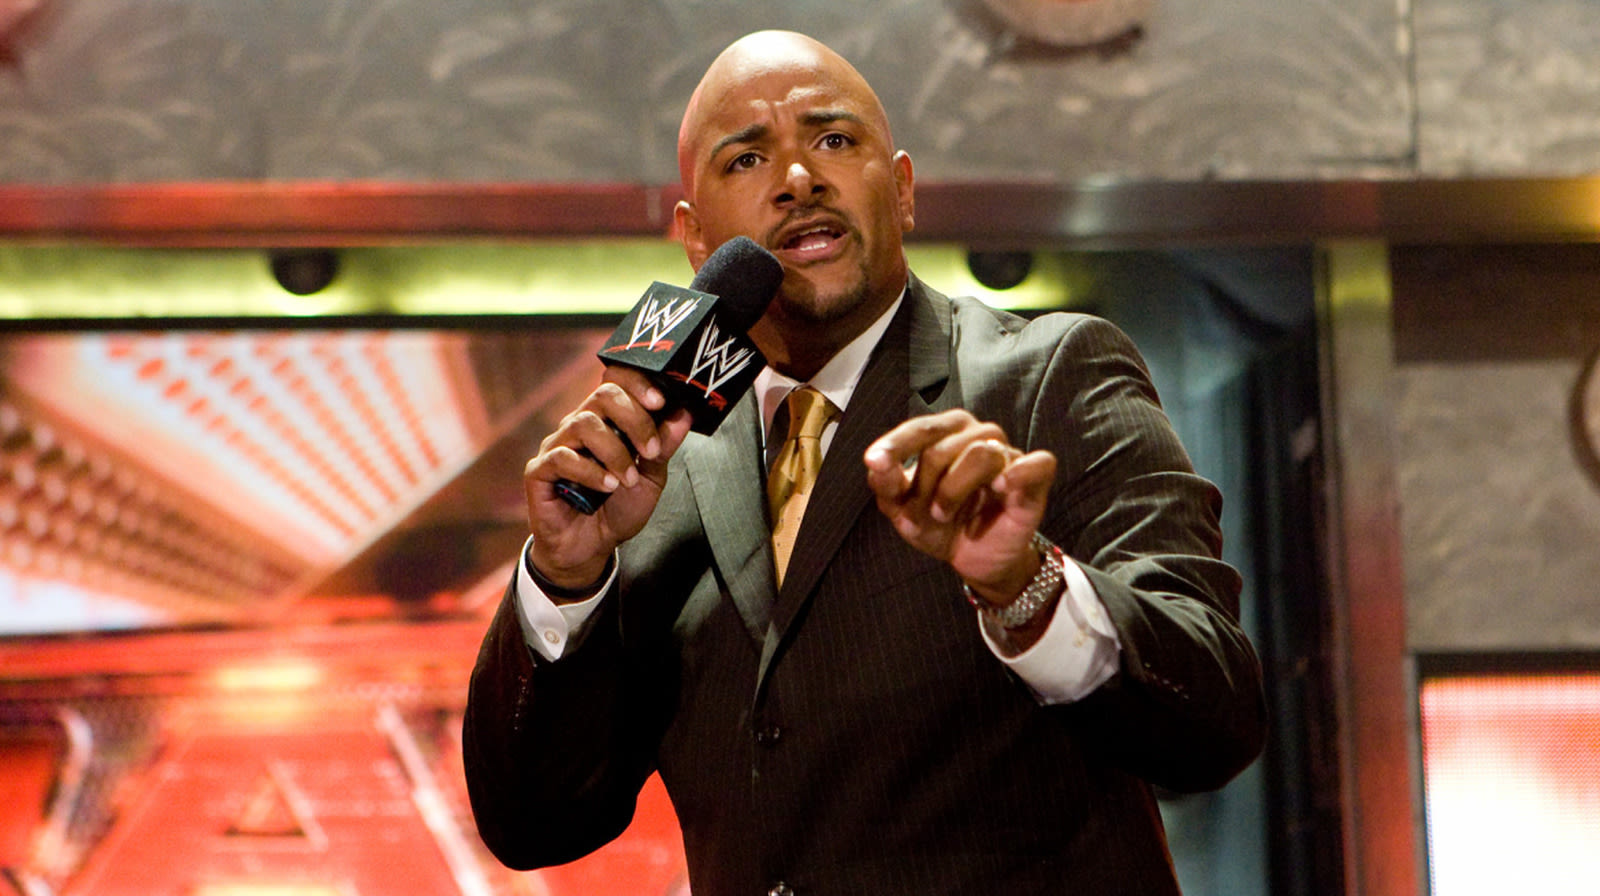 Jonathan Coachman Weighs In On The Rock's Final Boss Character In WWE - Wrestling Inc.